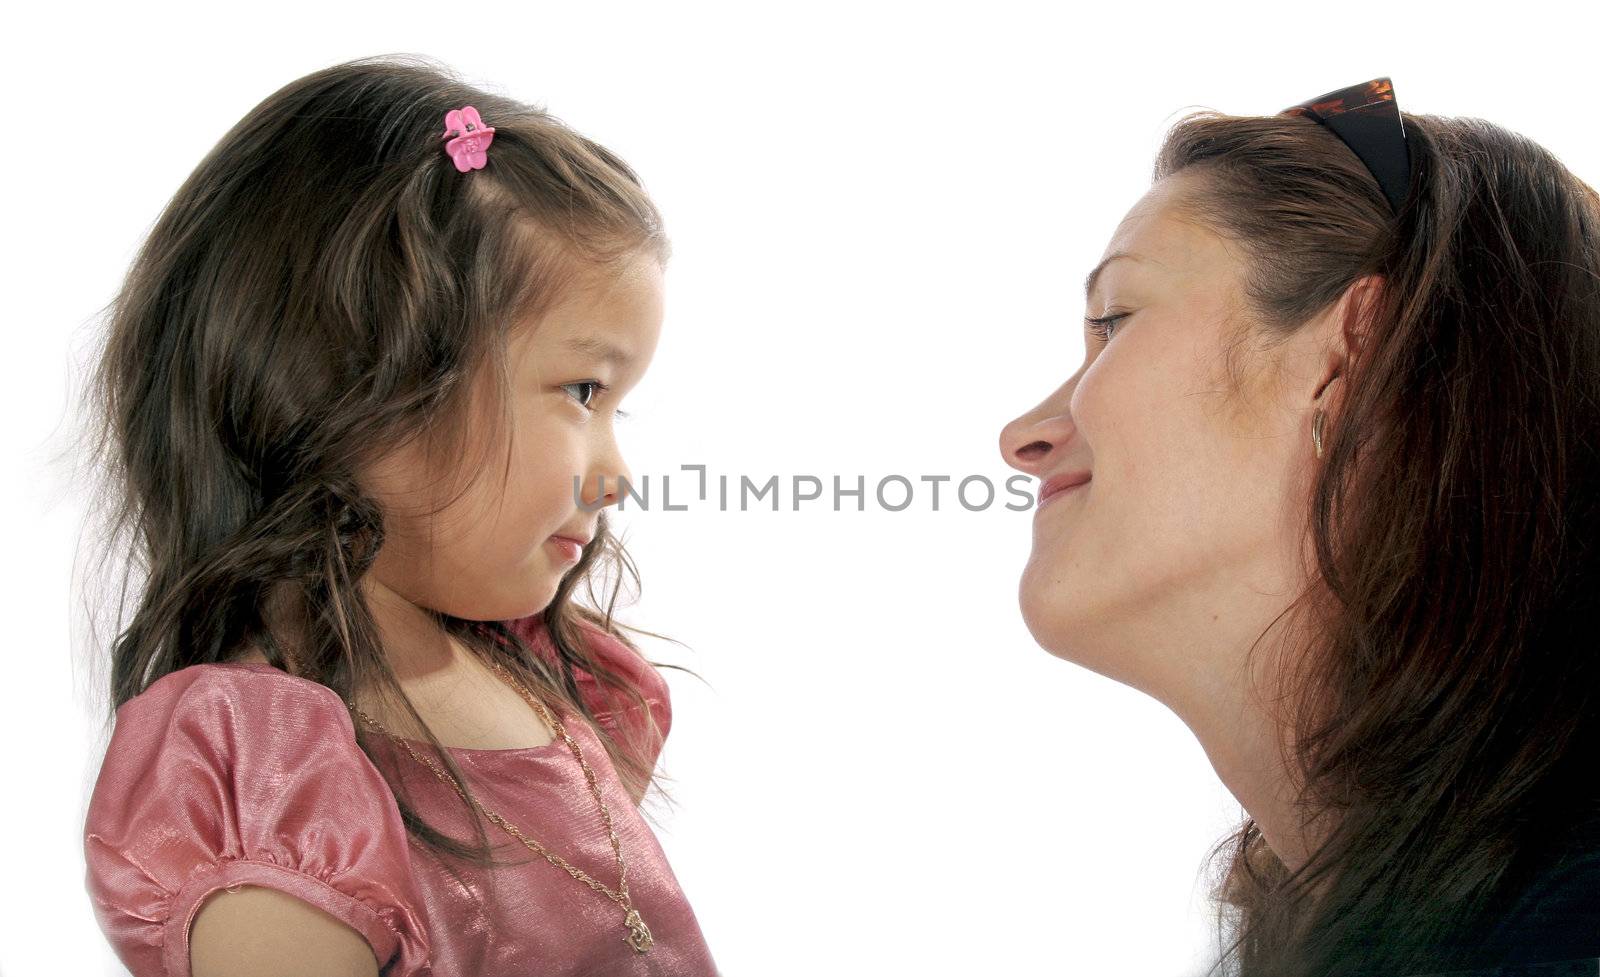 Mother and daughter look friend on friend and smile